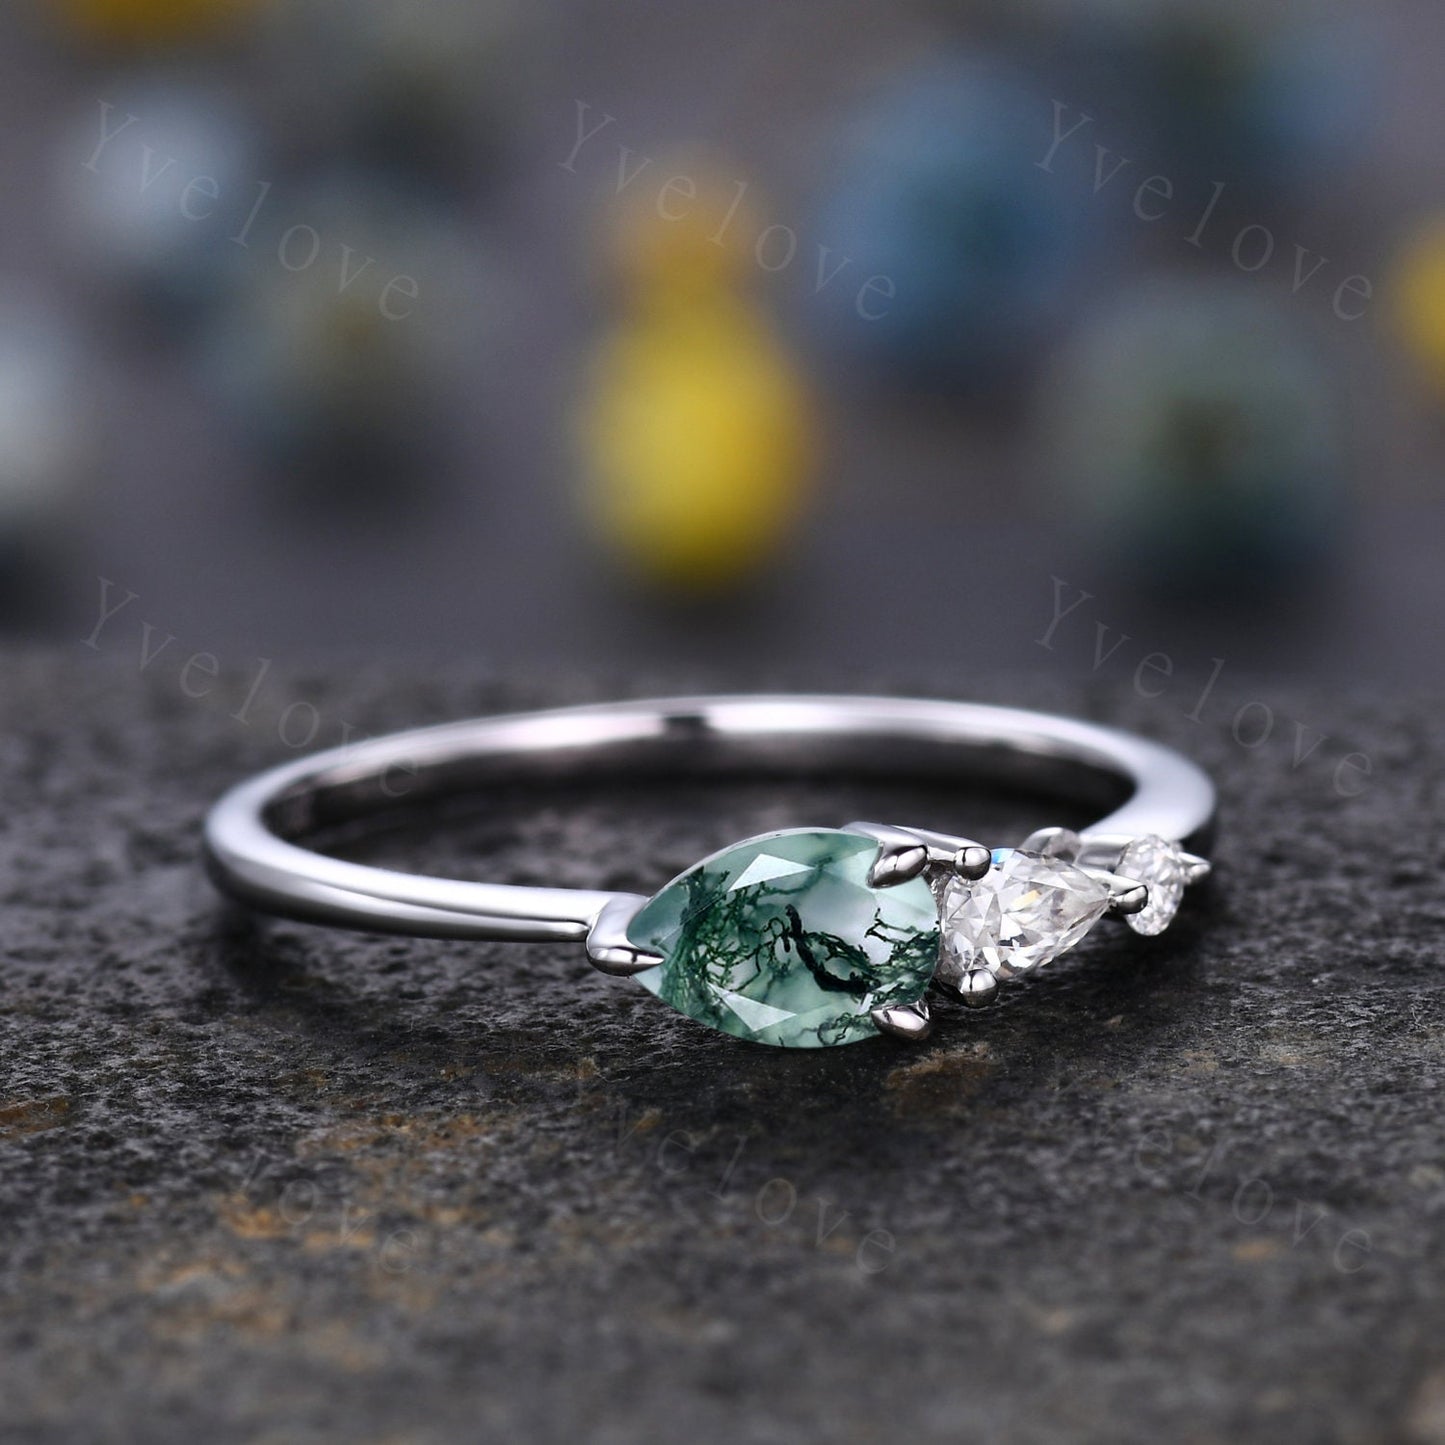 Vintage Moss Agate Ring Engagement Ring,Pear Cut Gems,Art Deco Moissanite Wedding Band,3 Stone Unique Women Bridal Promise Ring,White gold